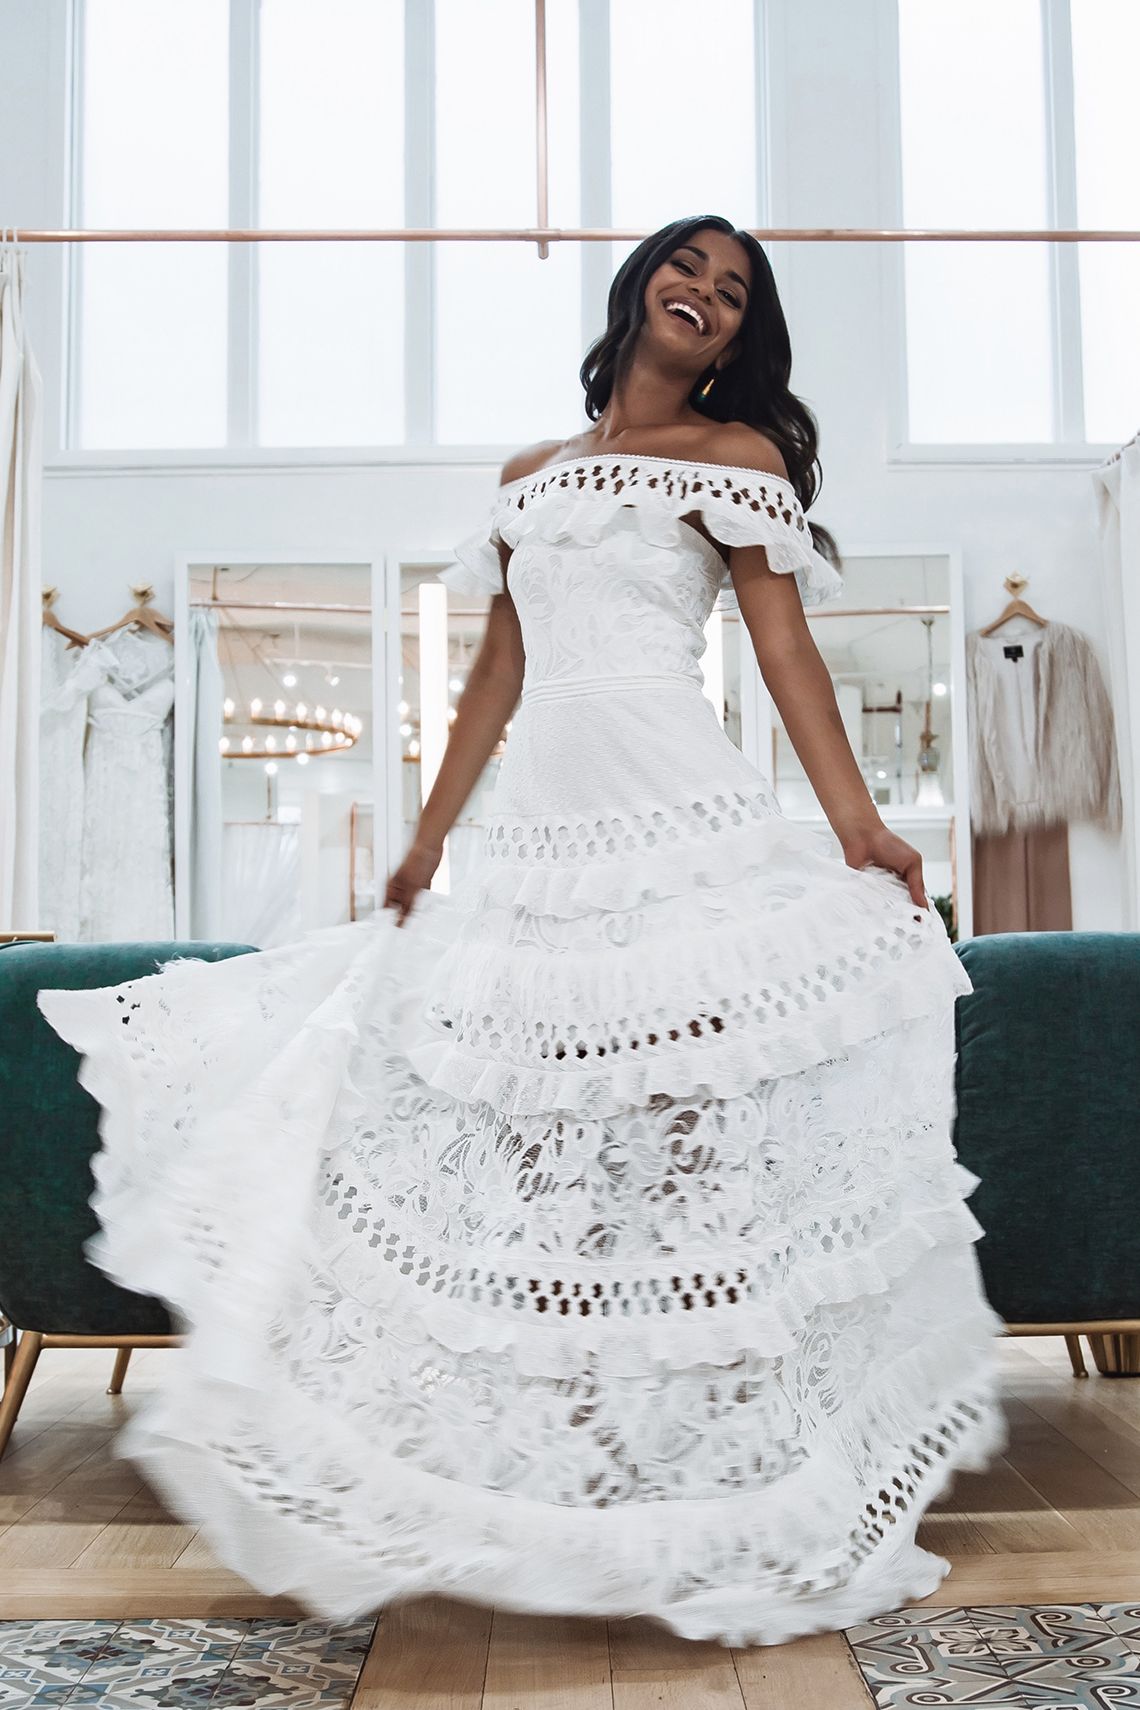 10 Reasons You Should Buy Your Wedding Dress at Grace ...